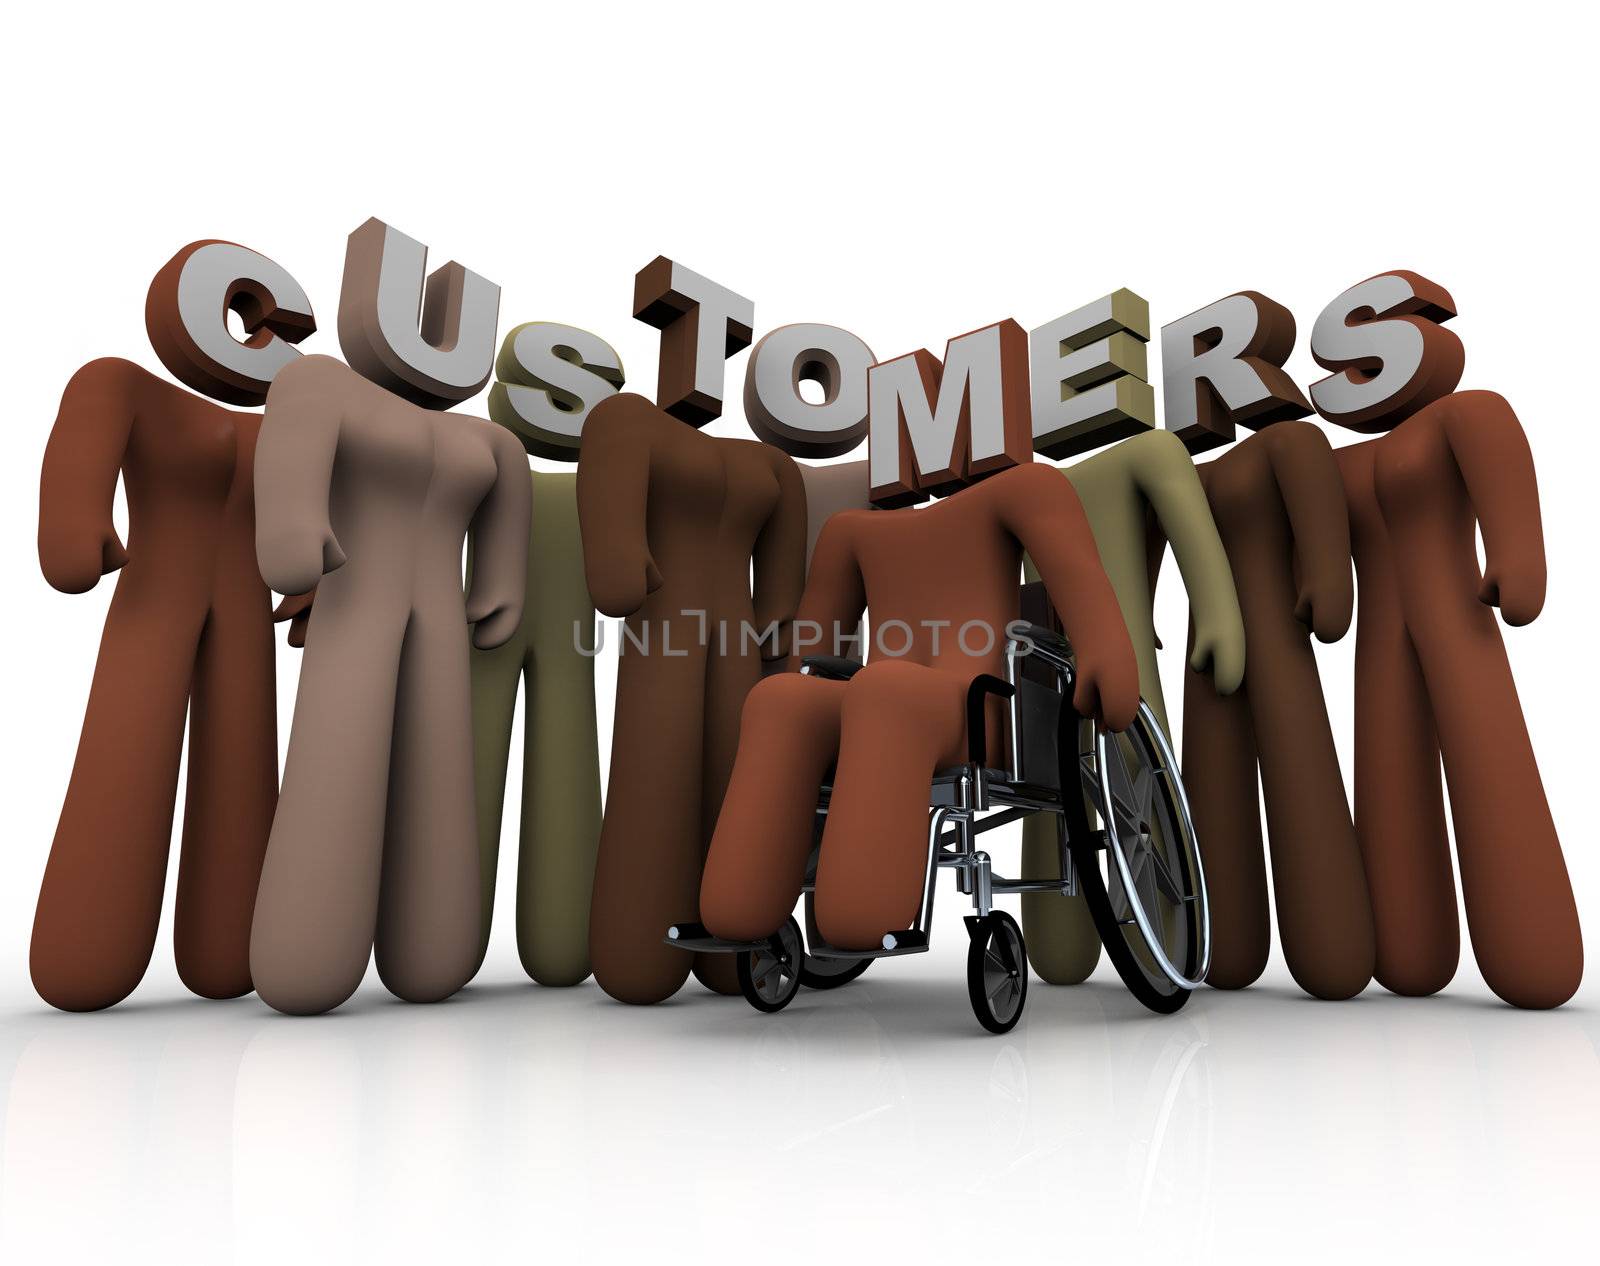 A group of people with different races and abilities, and letters on their heads spelling the word Customers to represent a wide range of buyers in a targeted marketing campaign